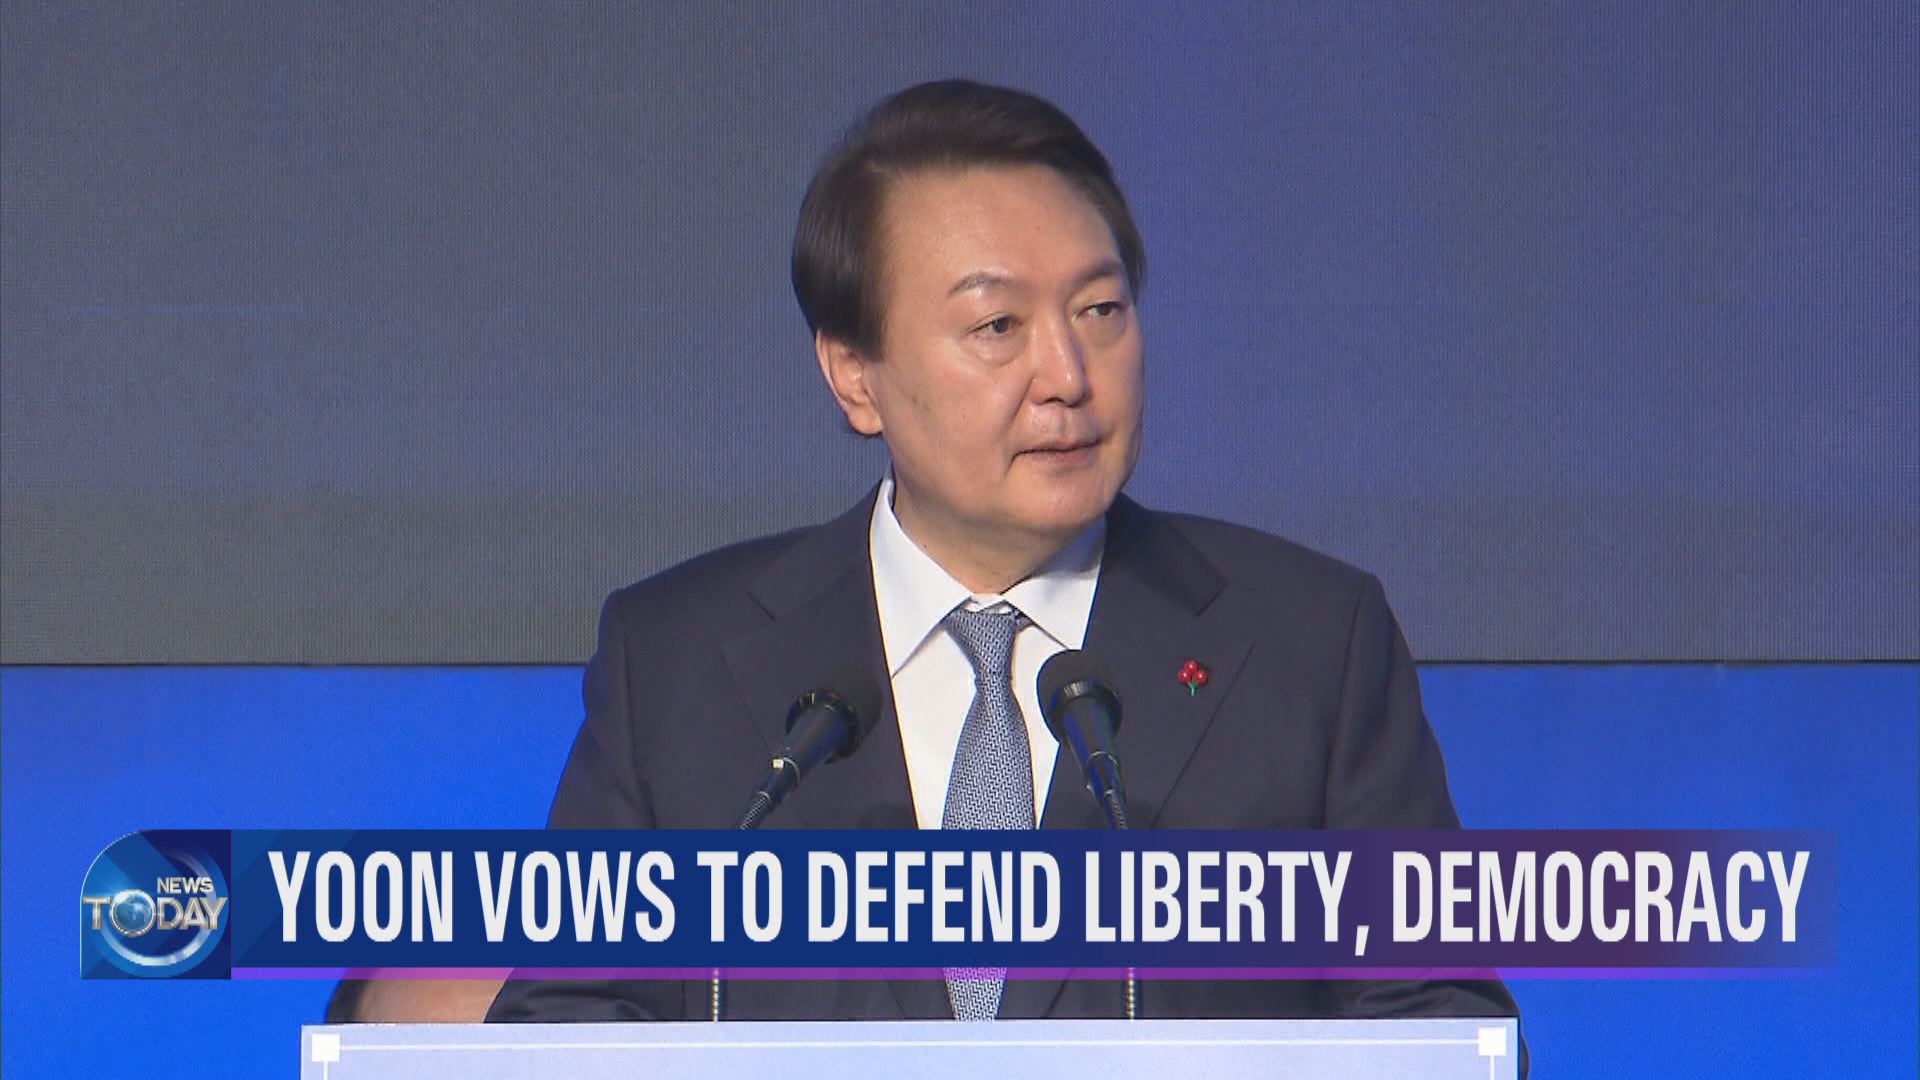 YOON VOWS TO DEFEND LIBERTY, DEMOCRACY